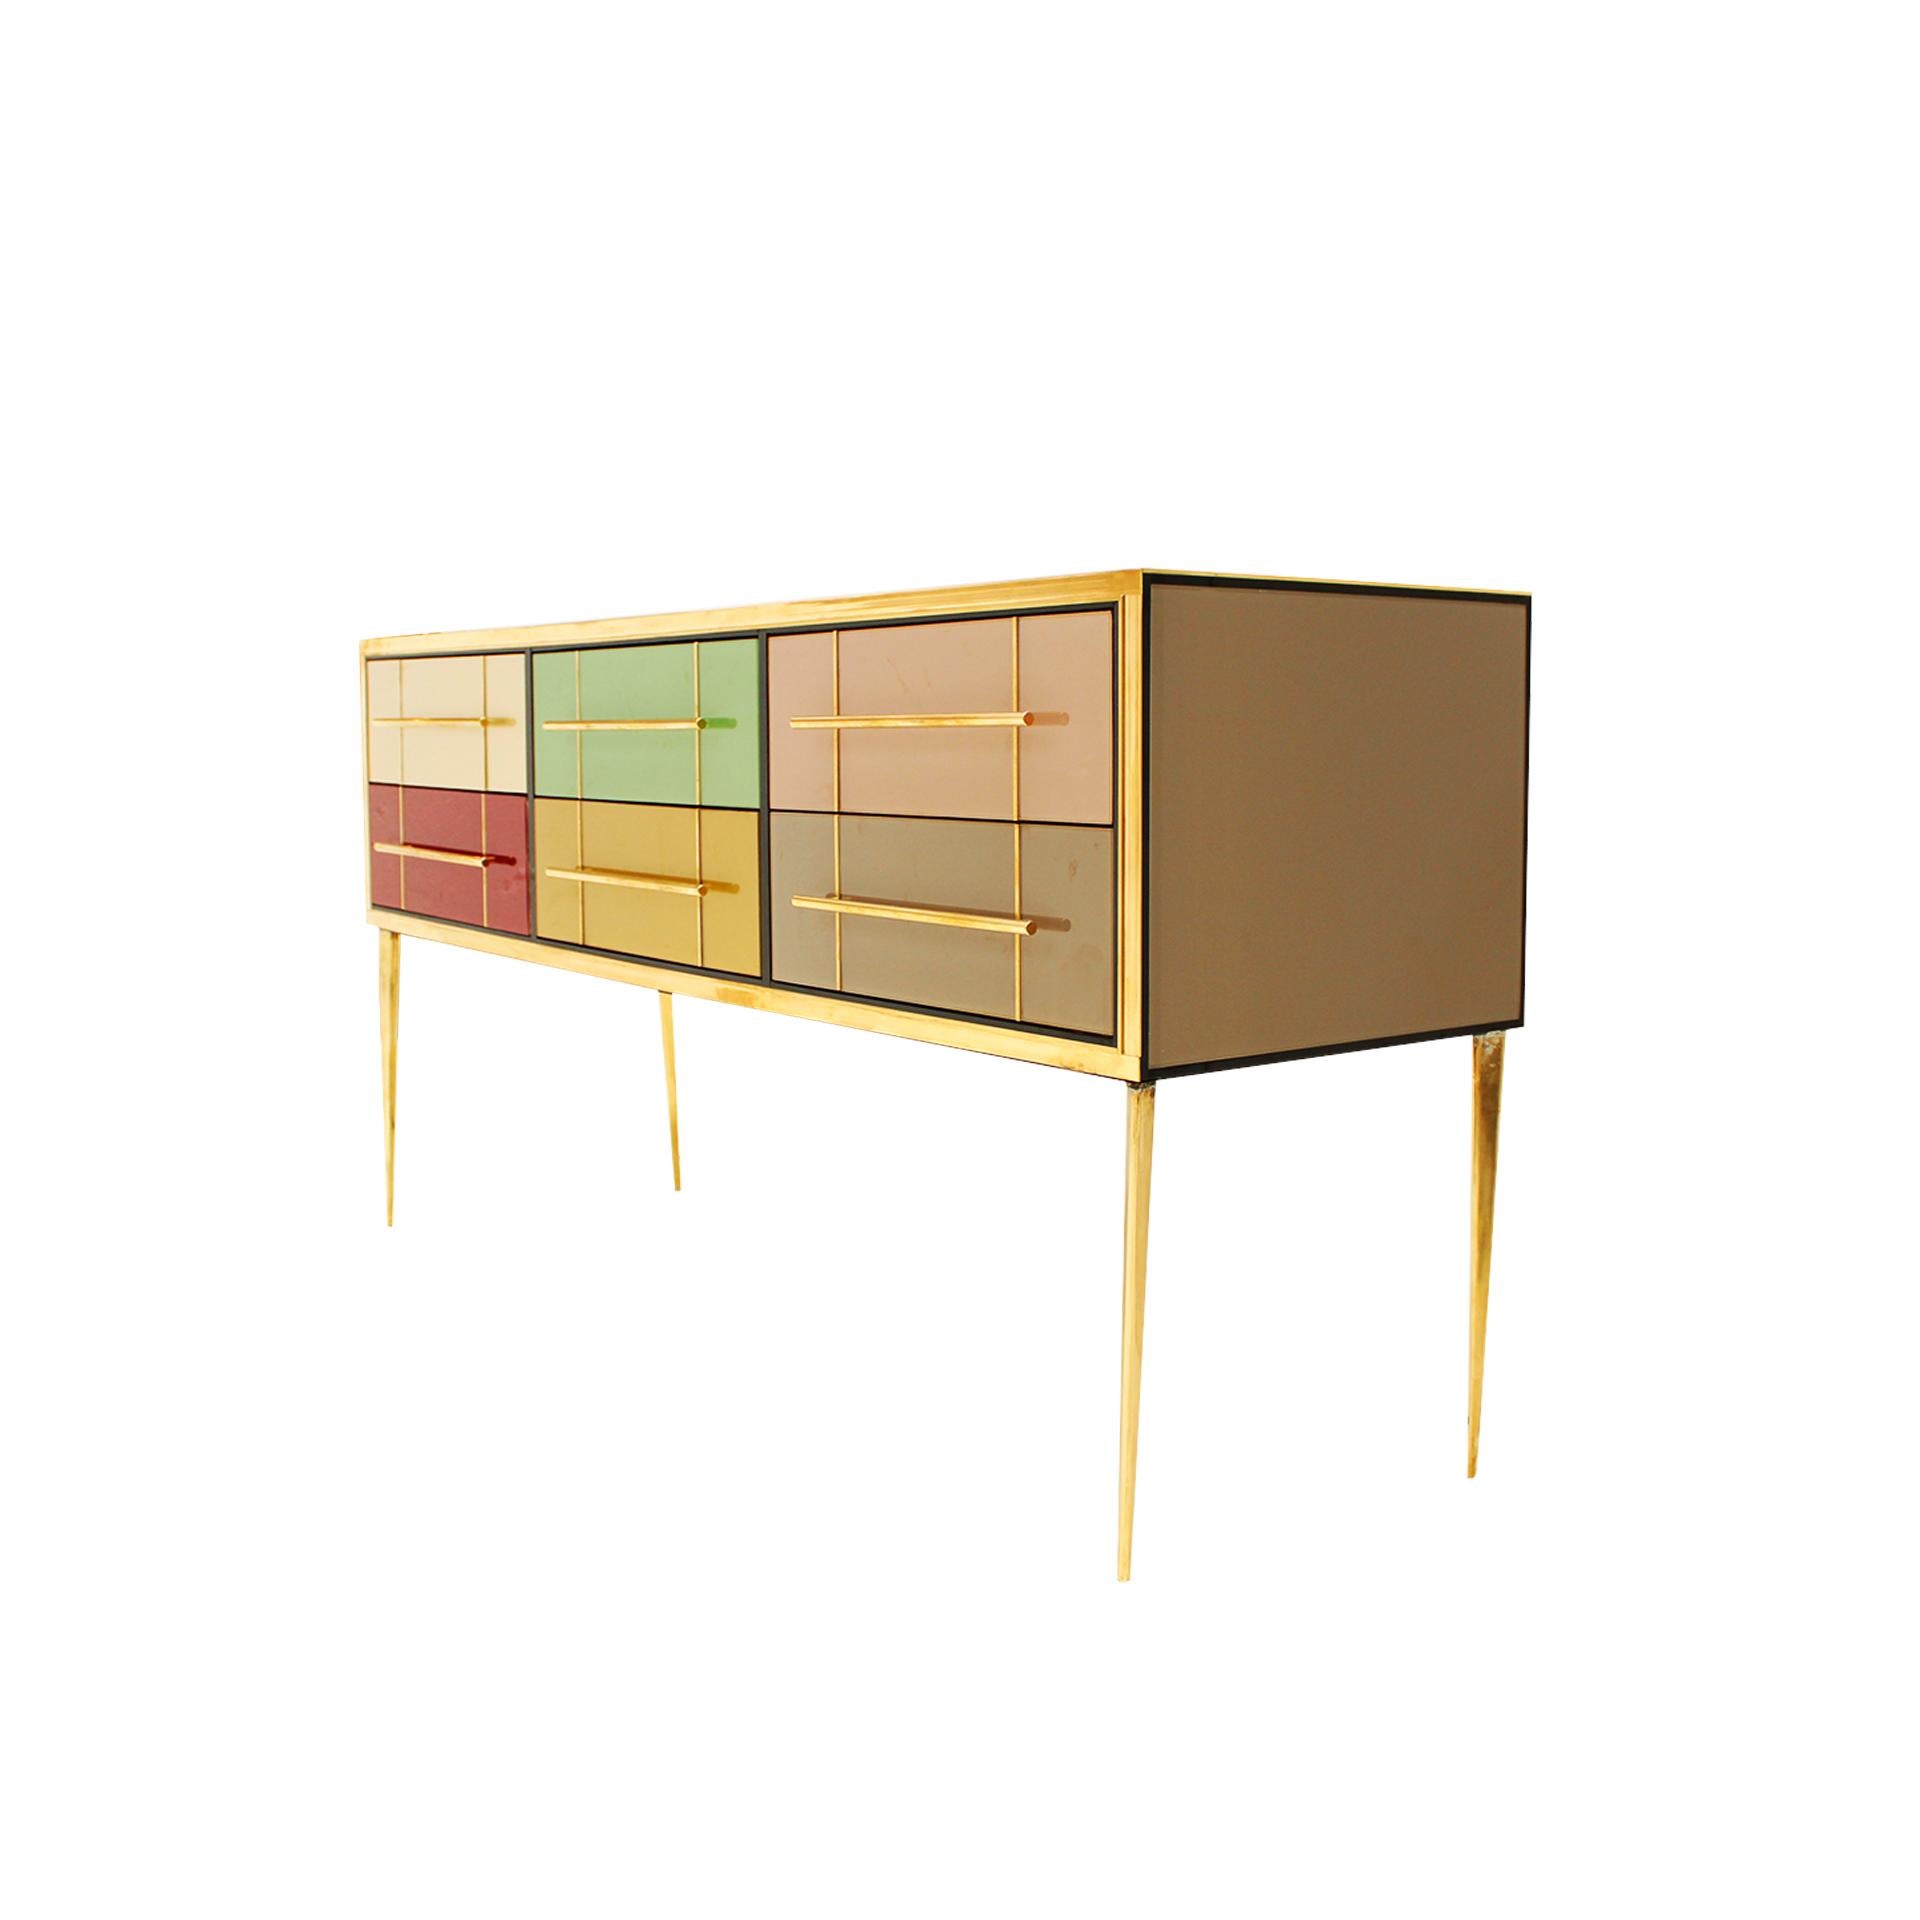 Sideborad comoposed of 6 drawers with original 1950s solid wood sturcture covered in colored glass. Handles, profiles and legs made of brass. Italy.

Production can last between 5 and 6 weeks.

Our main target is customer satisfaction, so we include